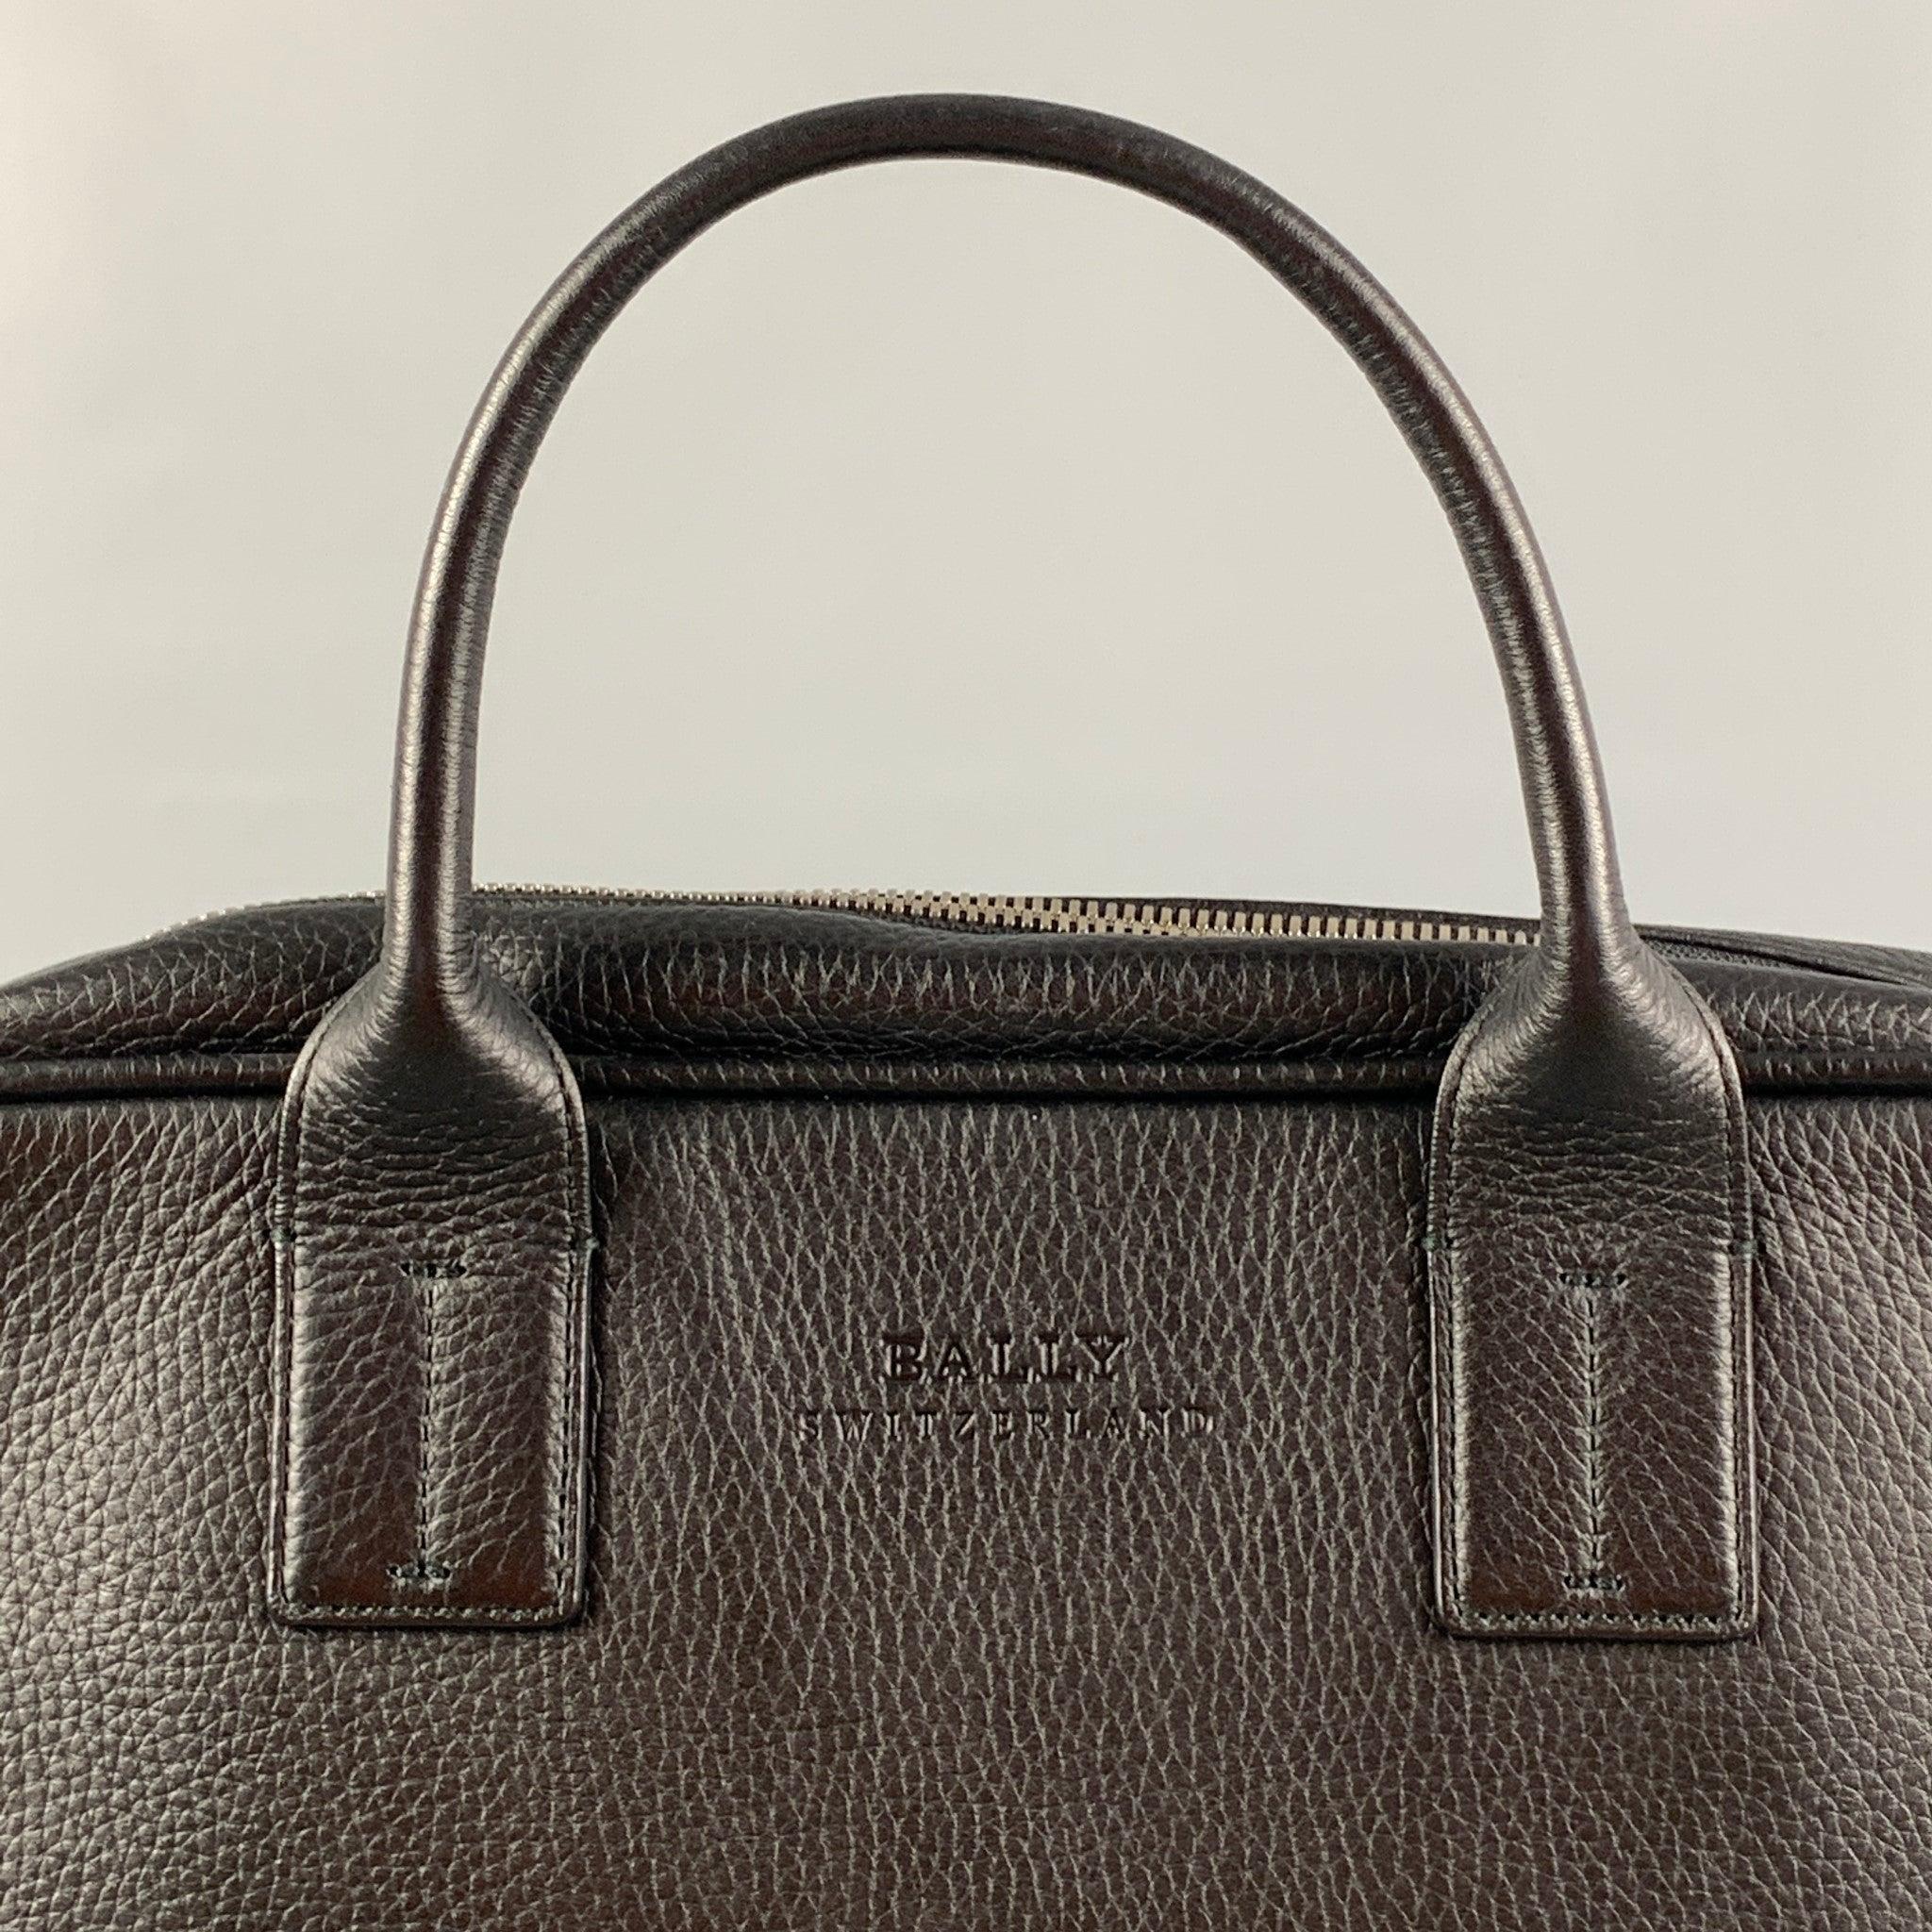 BALLY bag comes in a black leather featuring top handles, silver tone hardware, detachable shoulder strap, inner slots, and a zipper closure.
Excellent
Pre-Owned Condition. 

Measurements: 
  Length: 14.5 inches Width: 3 inches Height:
11.5 inches